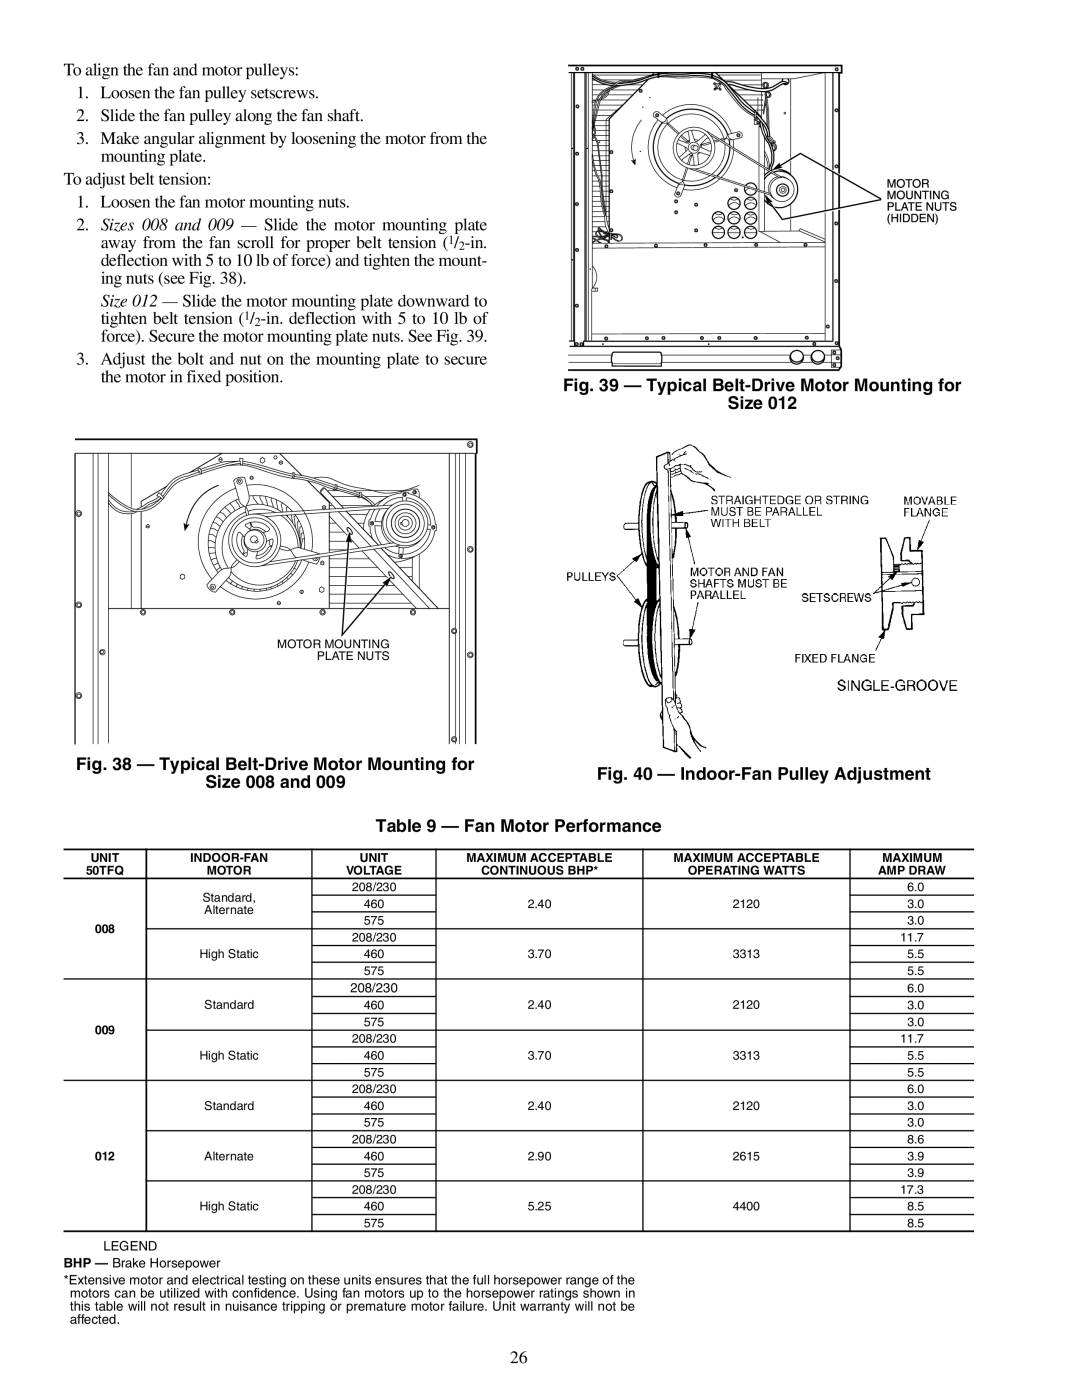 Carrier 50TFQ008-012 specifications Typical Belt-DriveMotor Mounting for, Indoor-FanPulley Adjustment, Size 008 and 